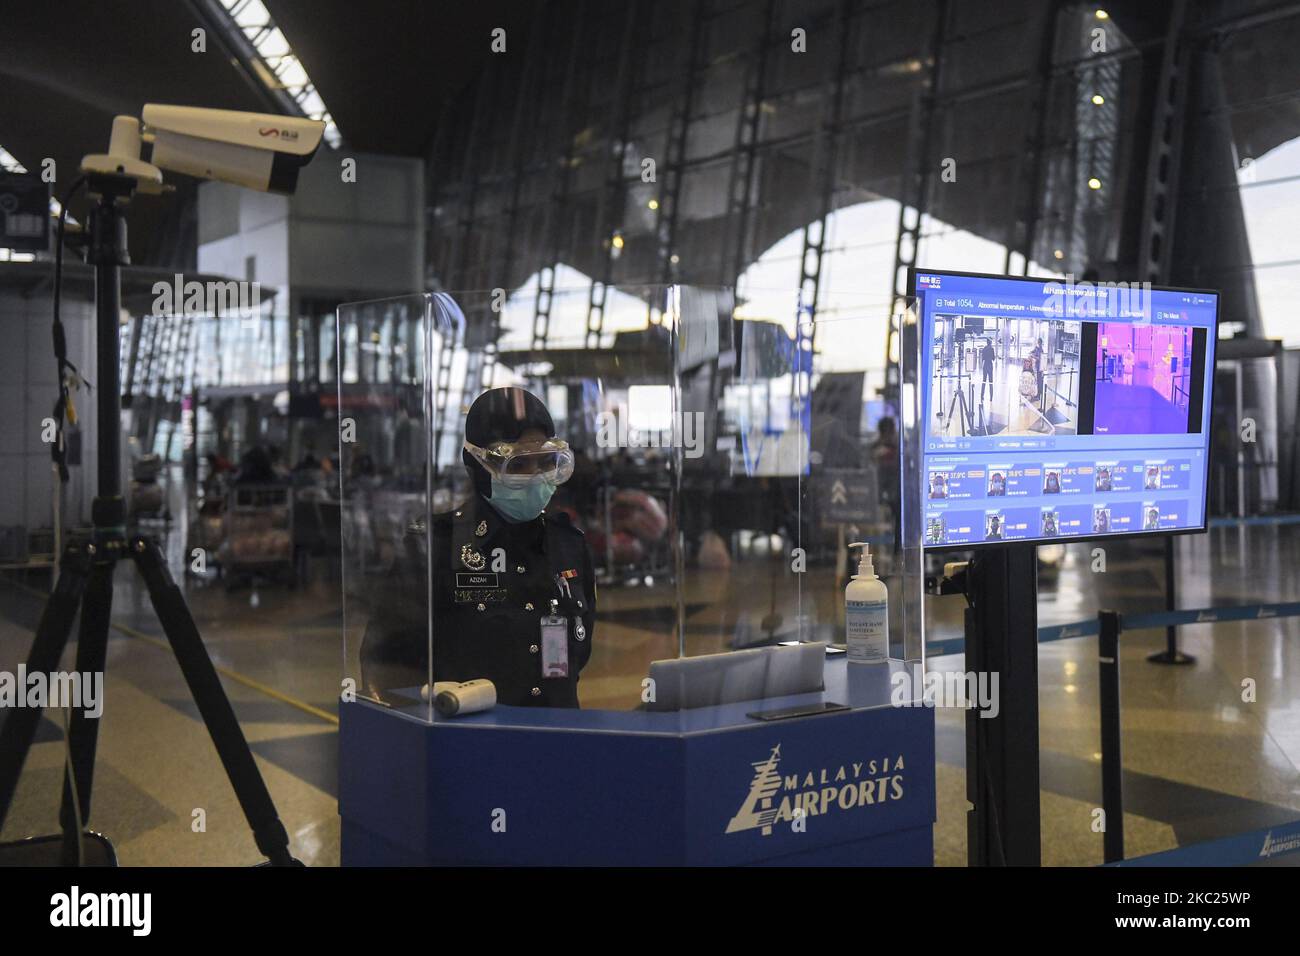 Police officers stand guard at the thermal screening point entrance inside Kuala Lumpur International Airport (KLIA), amid the coronavirus disease (COVID-19) outbreak in Selangor, Malaysia, on 19 October 2020. (Photo by Mat Zain/NurPhoto) Stock Photo